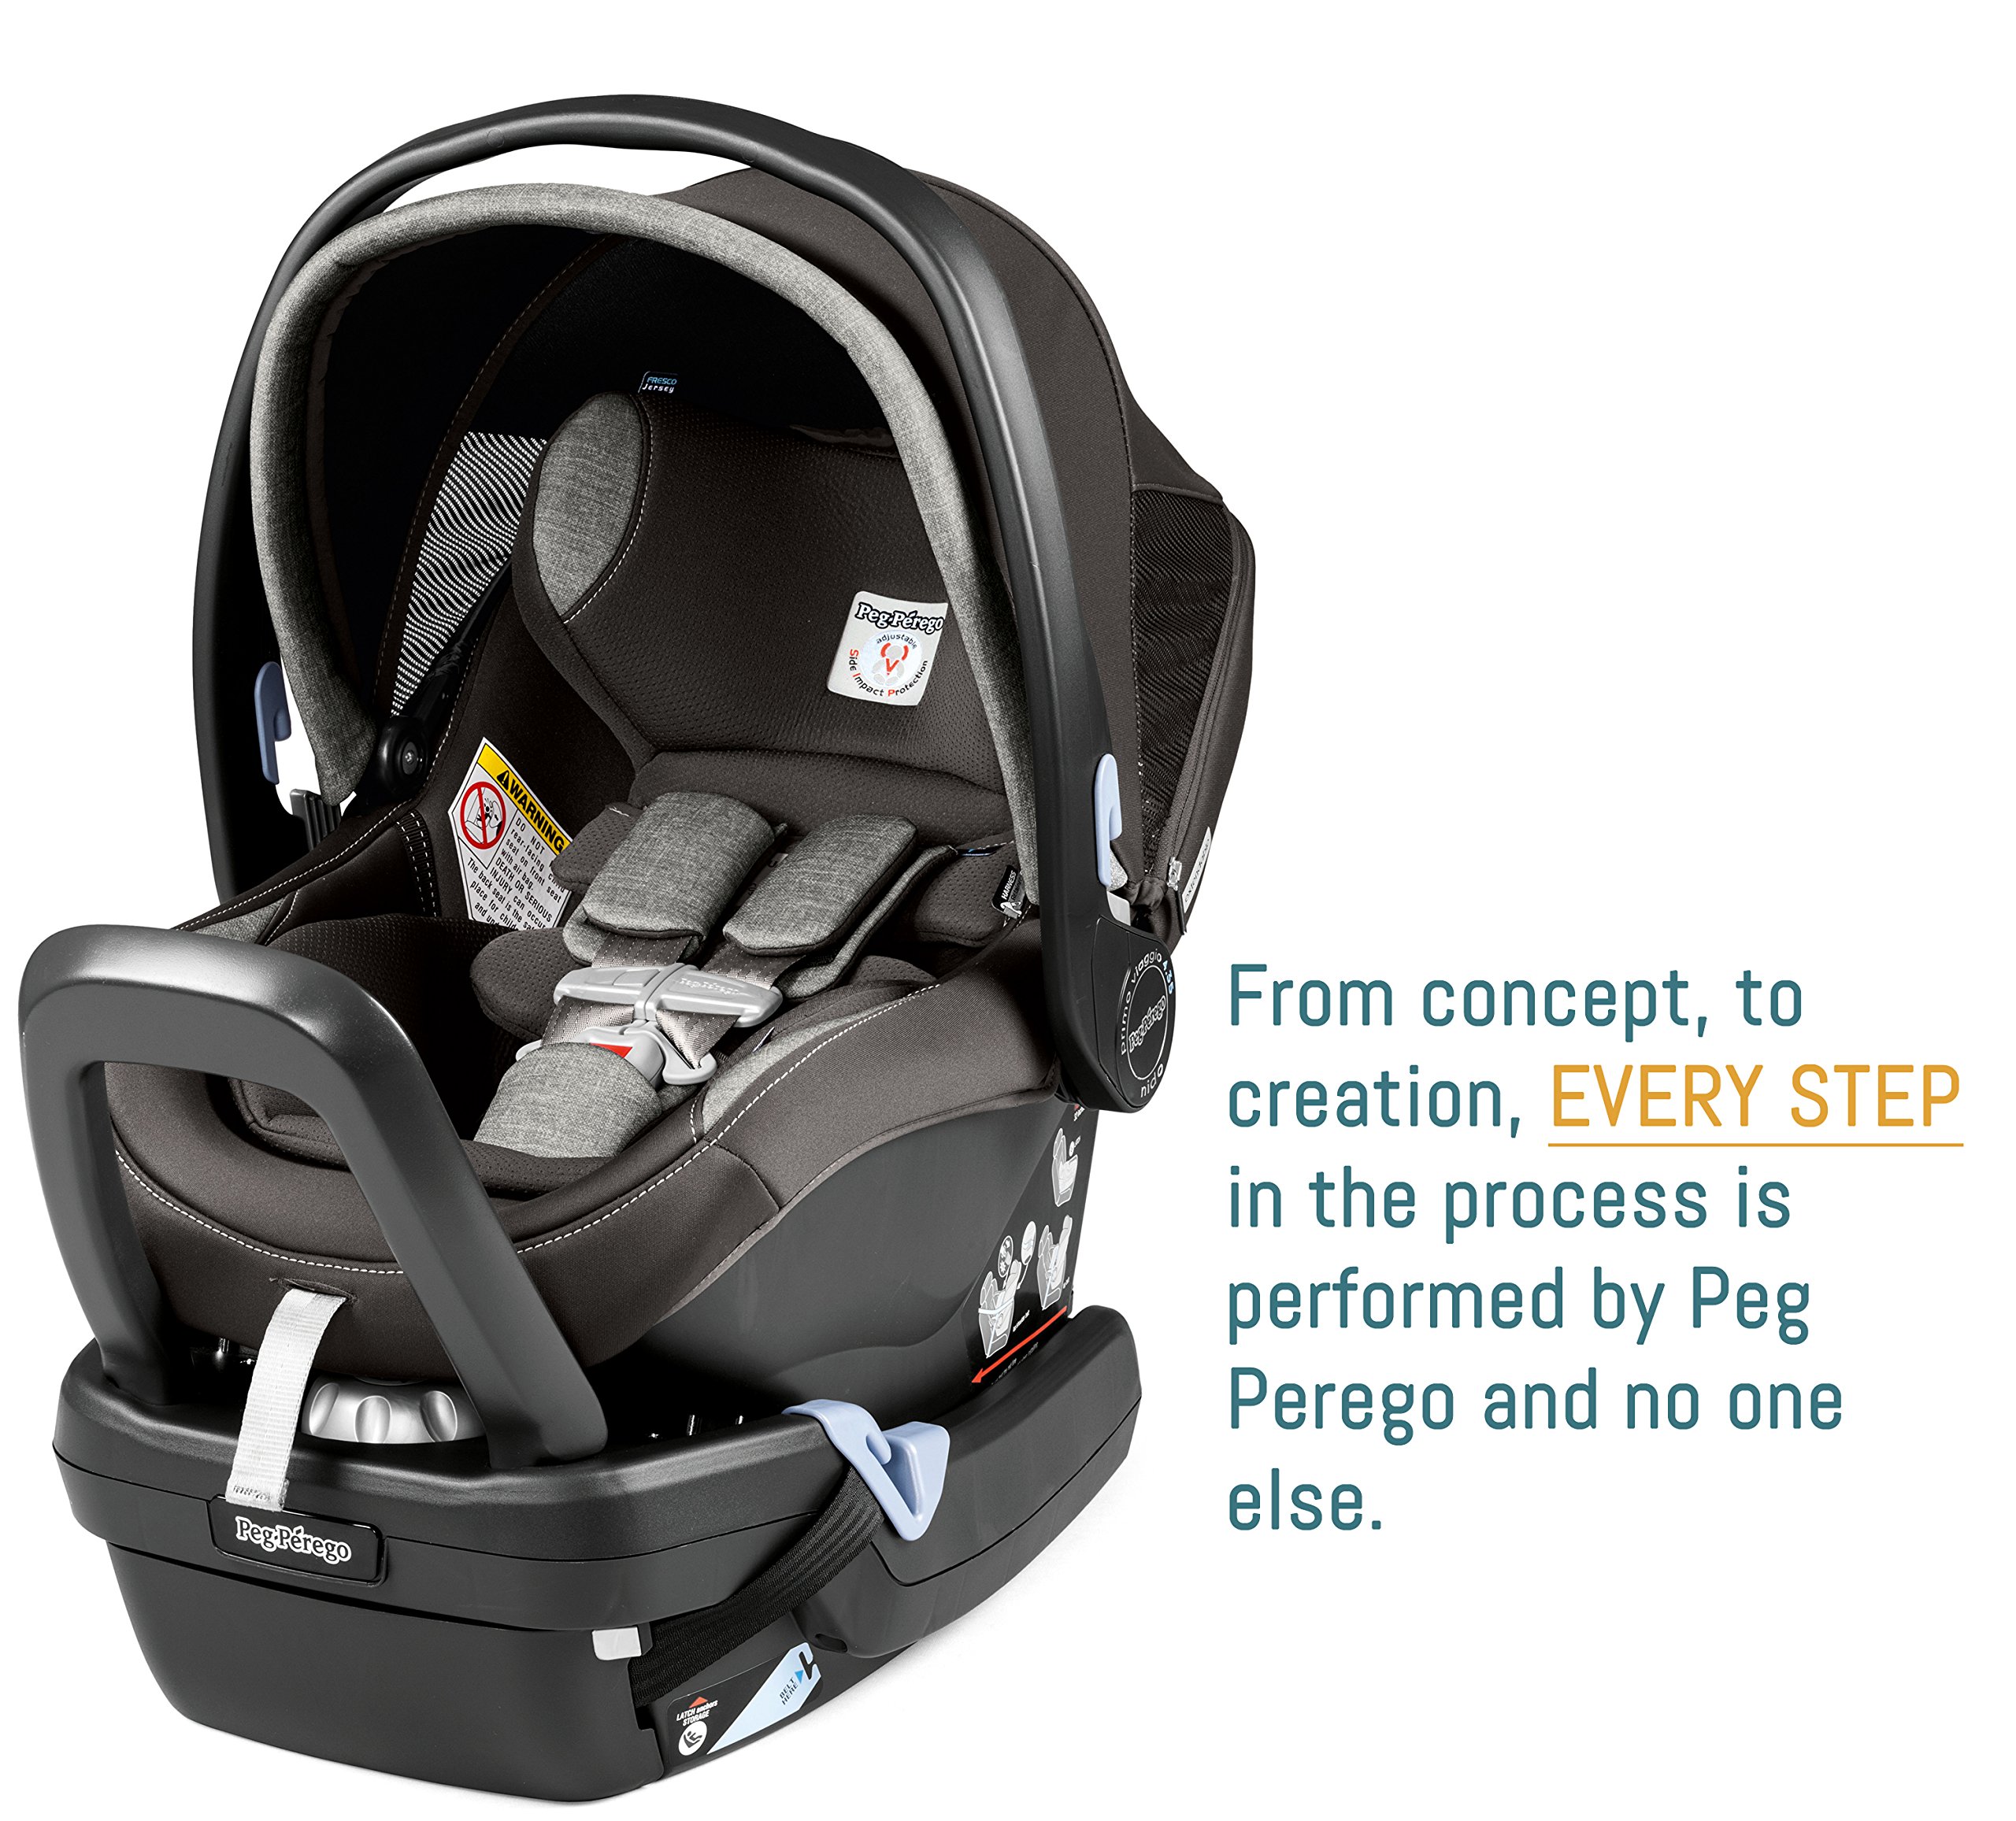 Peg Perego Primo Viaggio 4-35 Nido - Rear Facing Infant Car Seat - Includes Base with Load Leg & Anti-Rebound Bar - for Babies 4 to 35 lbs - Made in Italy - Licorice (Black)